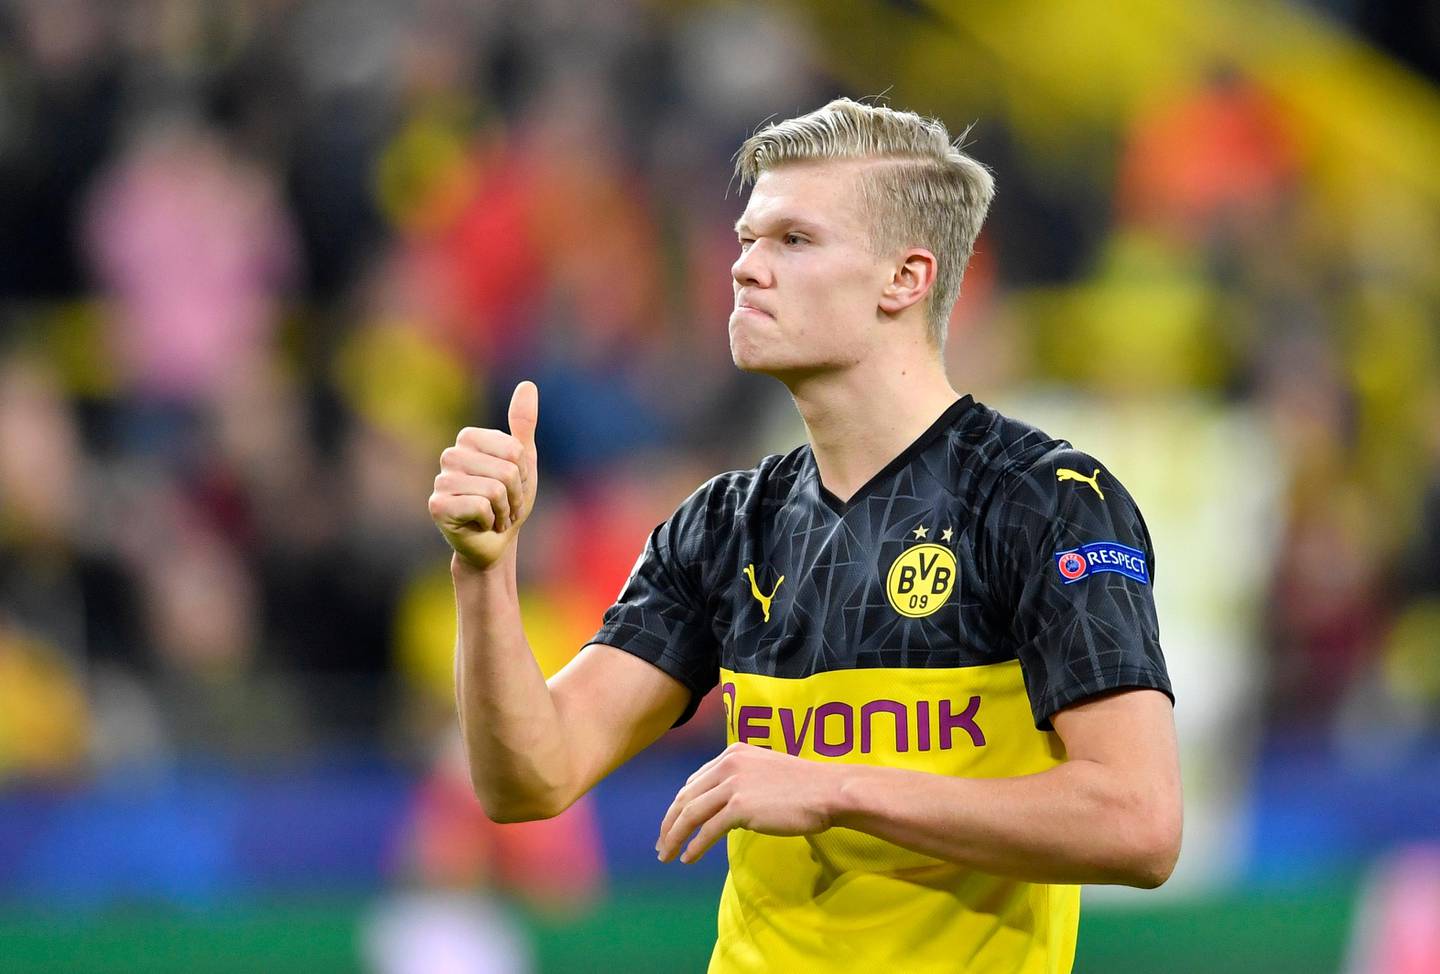 Dortmund's Erling Braut Haaland gives thumbs up at the end of the Champions League round of 16 first leg soccer match between Borussia Dortmund and Paris Saint Germain in Dortmund, Germany, Tuesday, Feb. 18, 2020. (AP Photo/Martin Meissner)